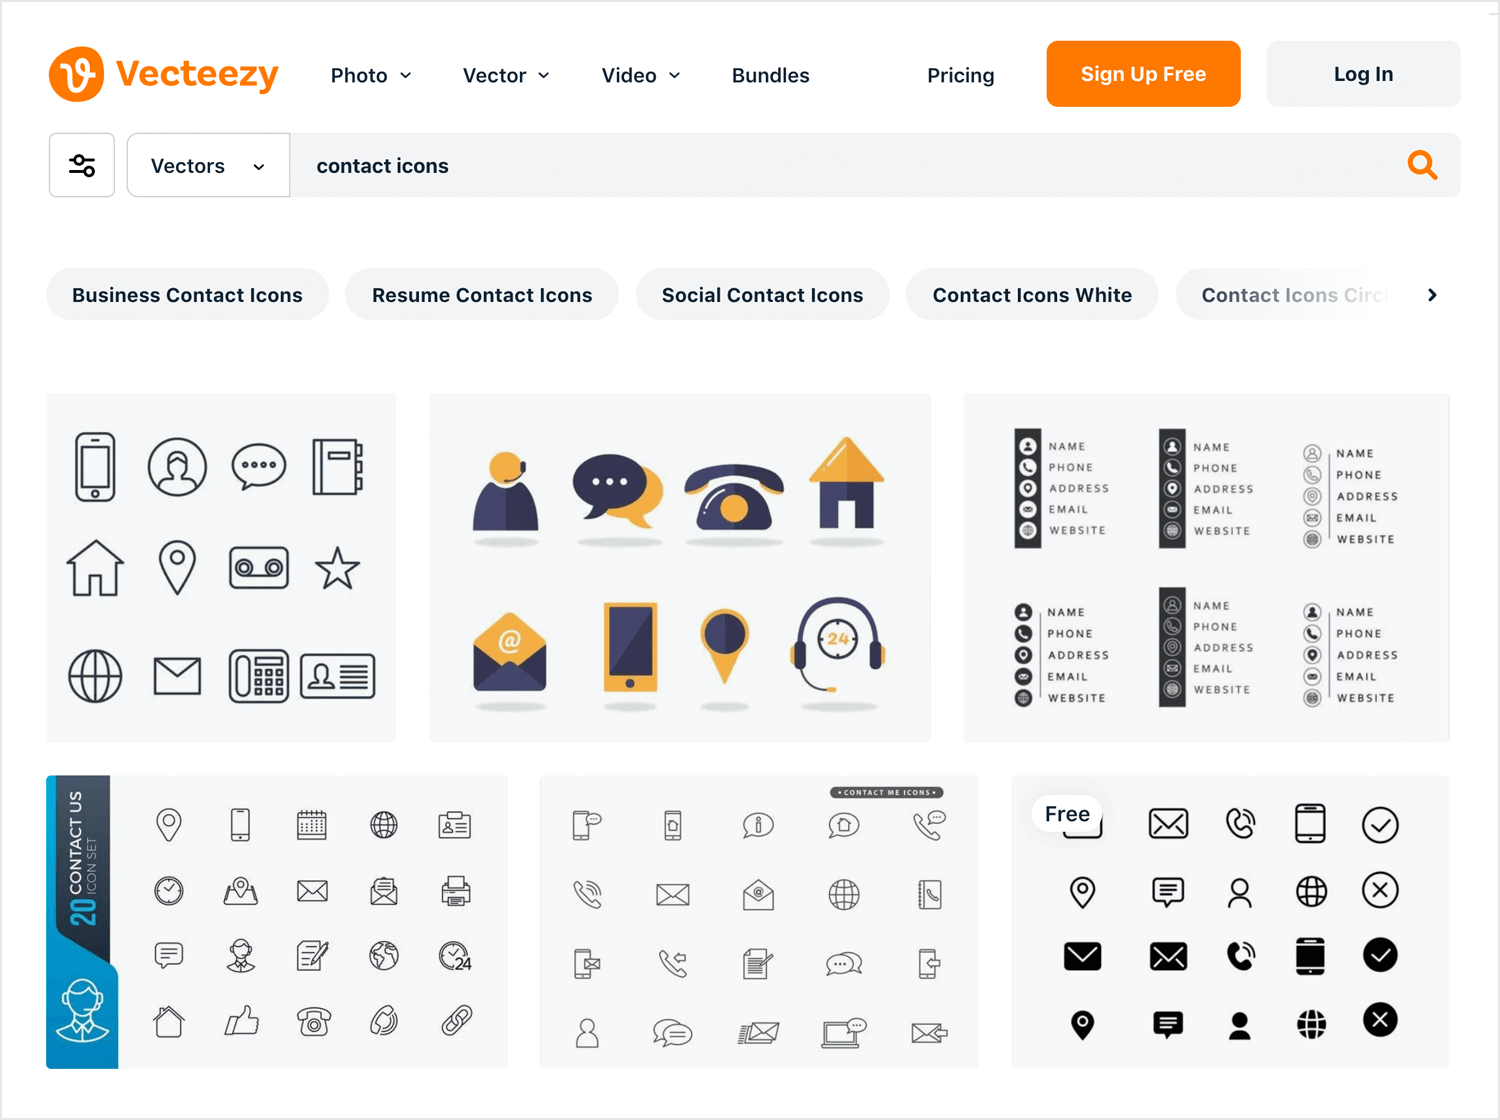 database fpr free icons and stock images for designers